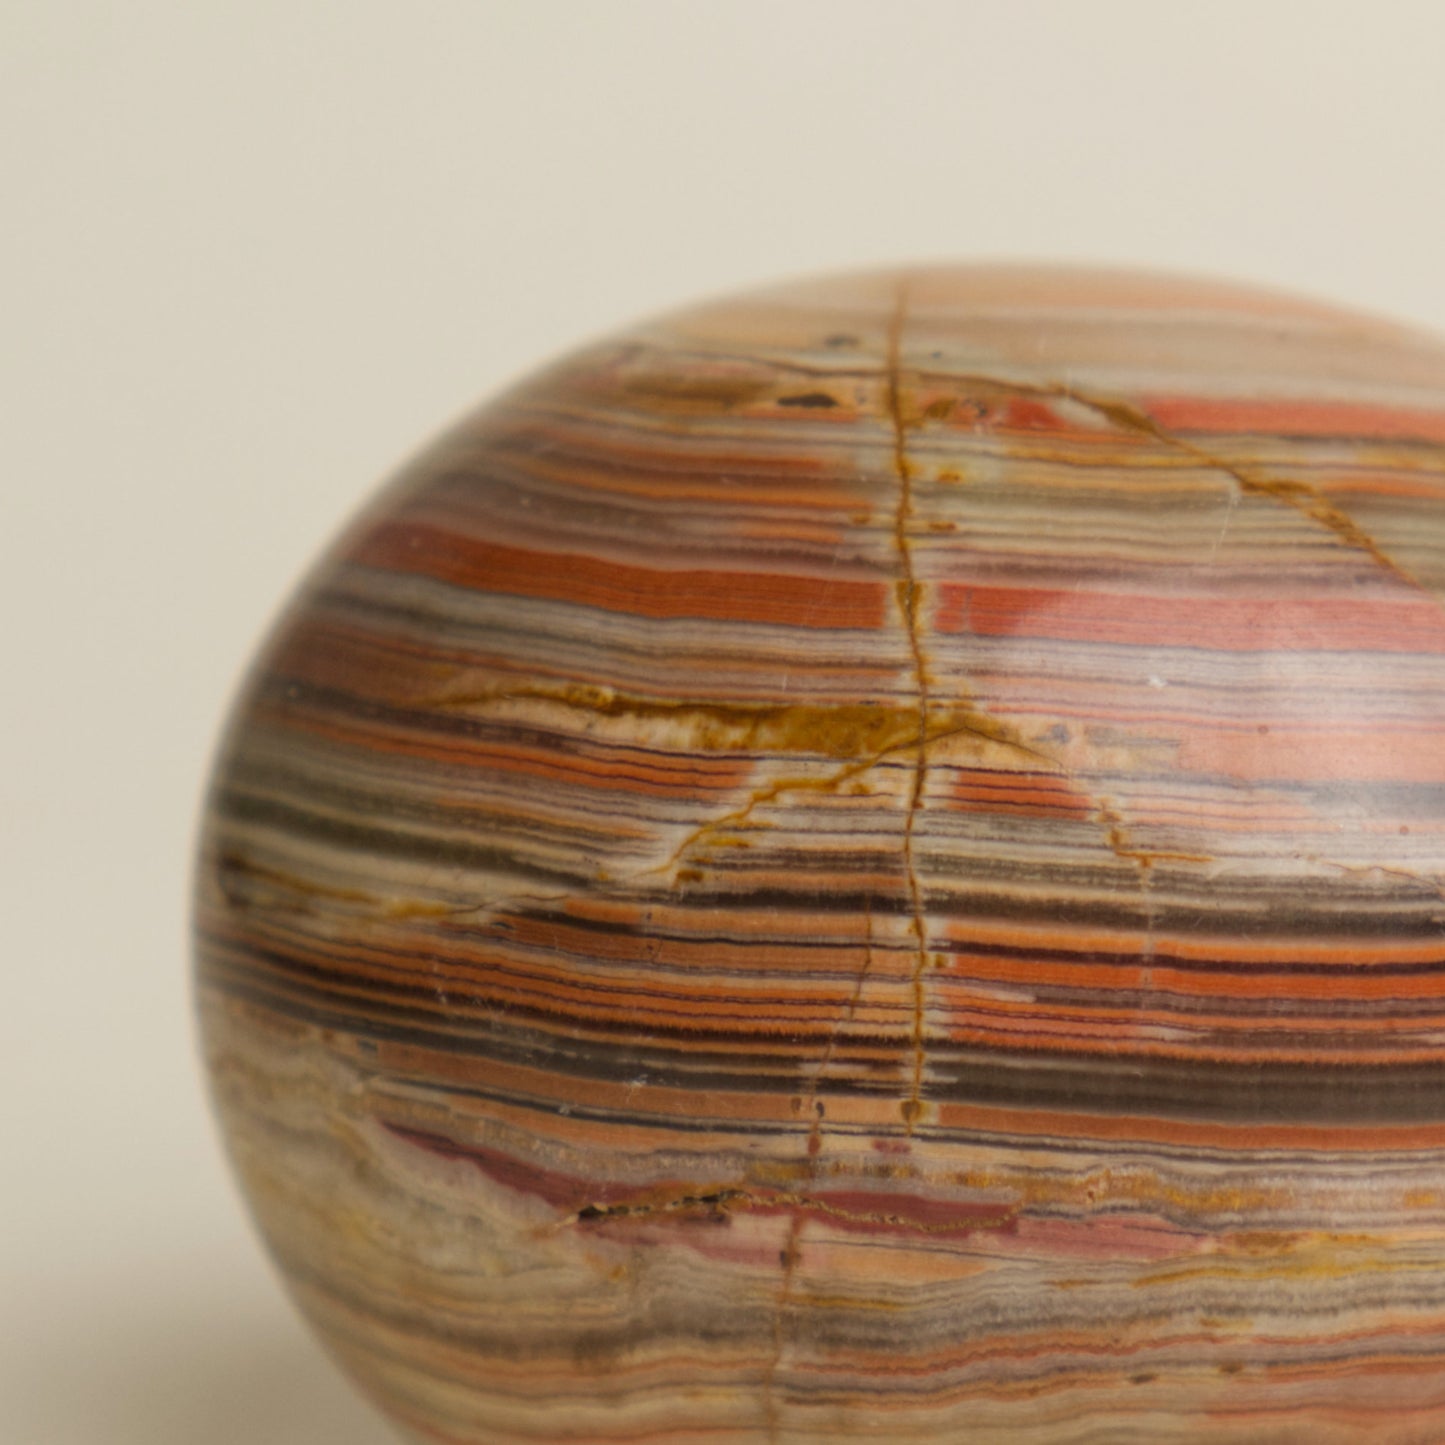 EGG OBJECT MARBLE EARTH COLOR